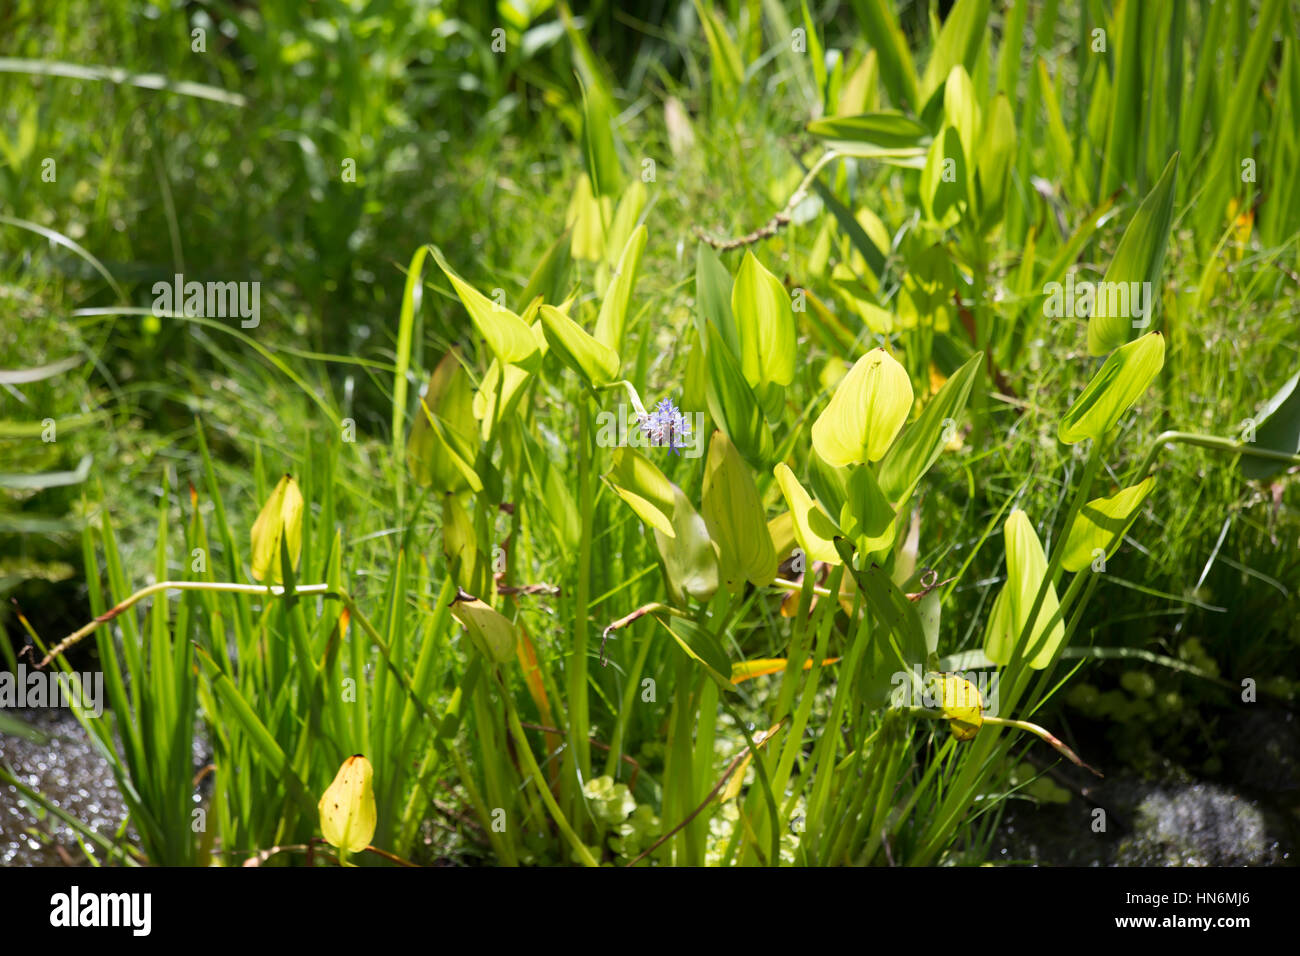 Overgrowth of invasive pickerel weed stalks and flowers Stock Photo